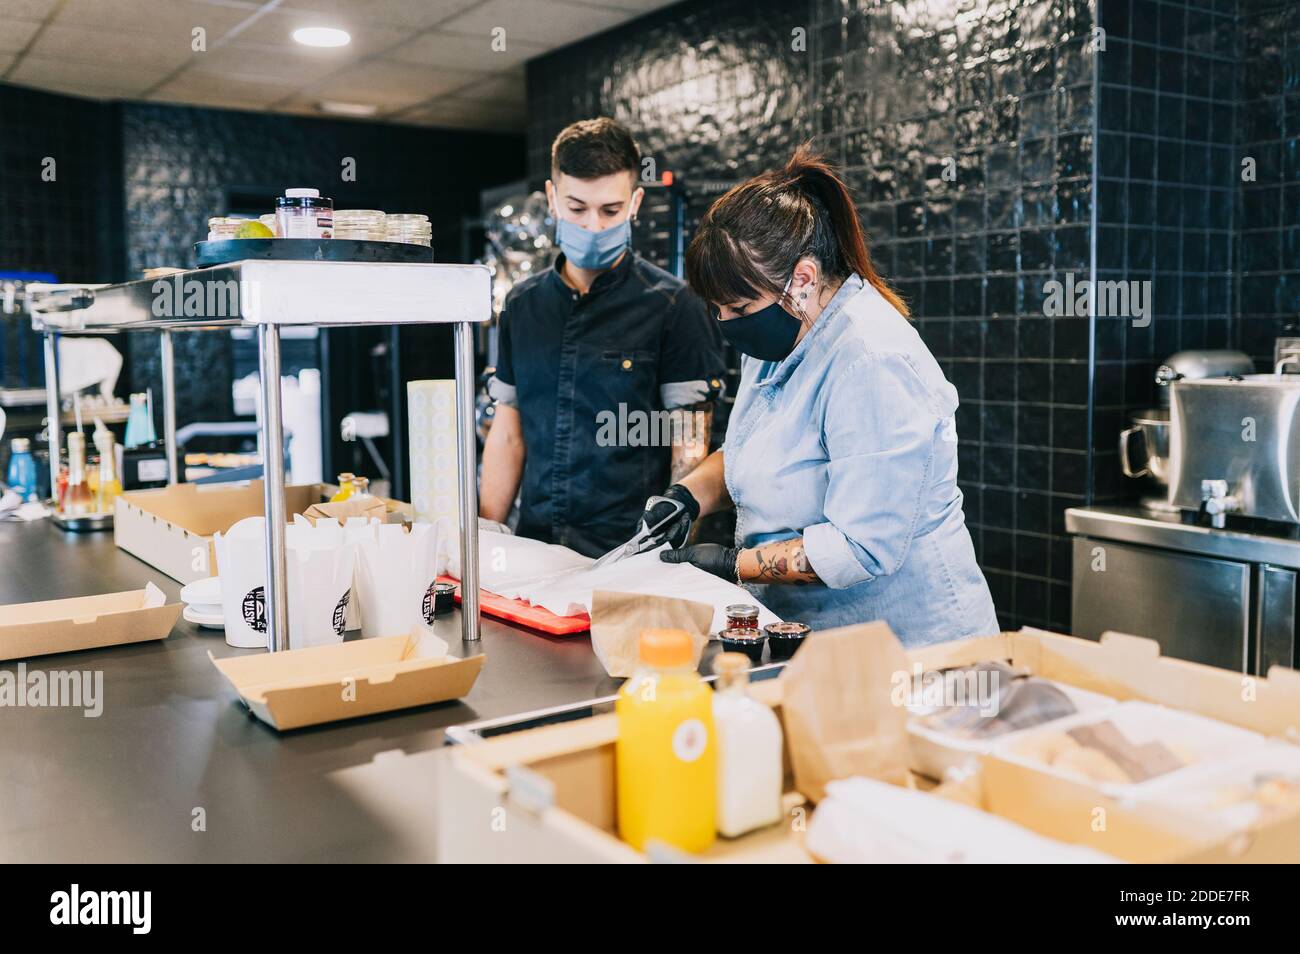 Male and female coworkers preparing take out meal at kitchen counter in restaurant Stock Photo